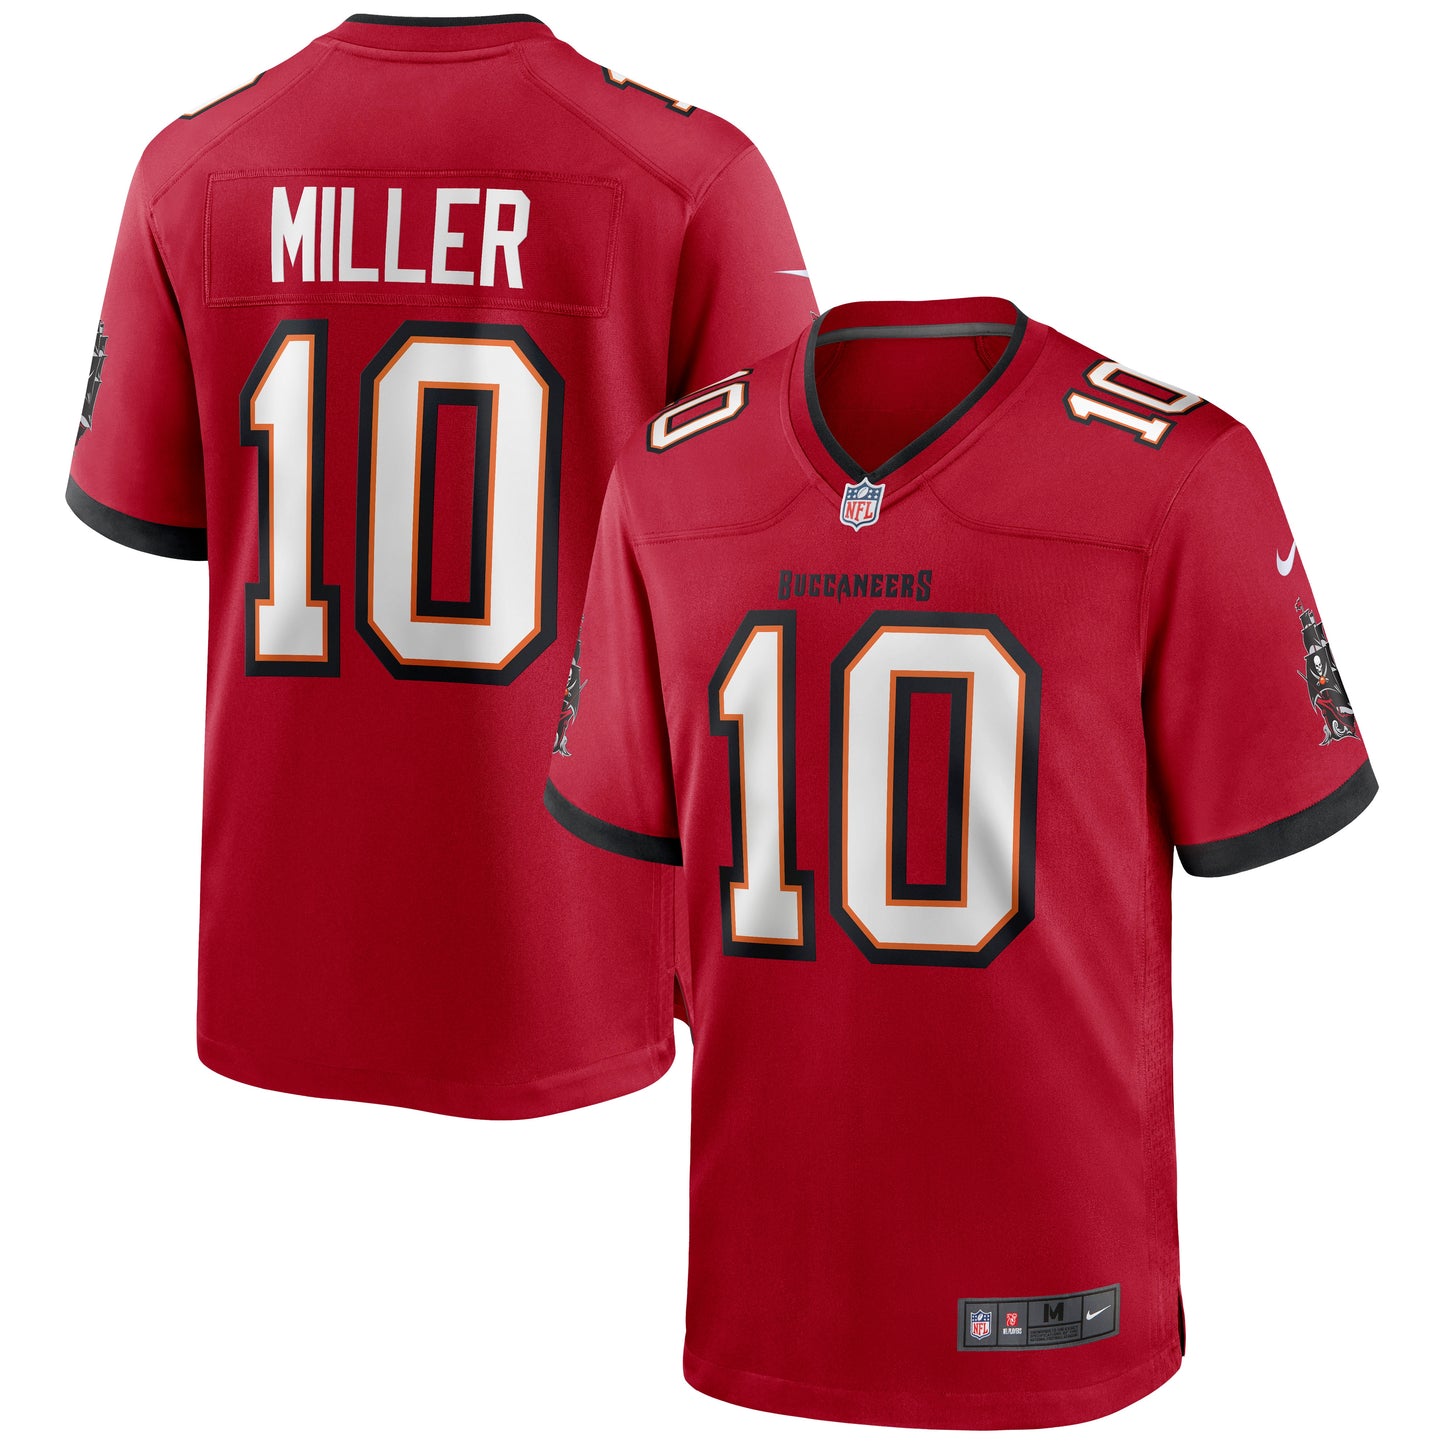 Scotty Miller Tampa Bay Buccaneers Nike Game Jersey - Red